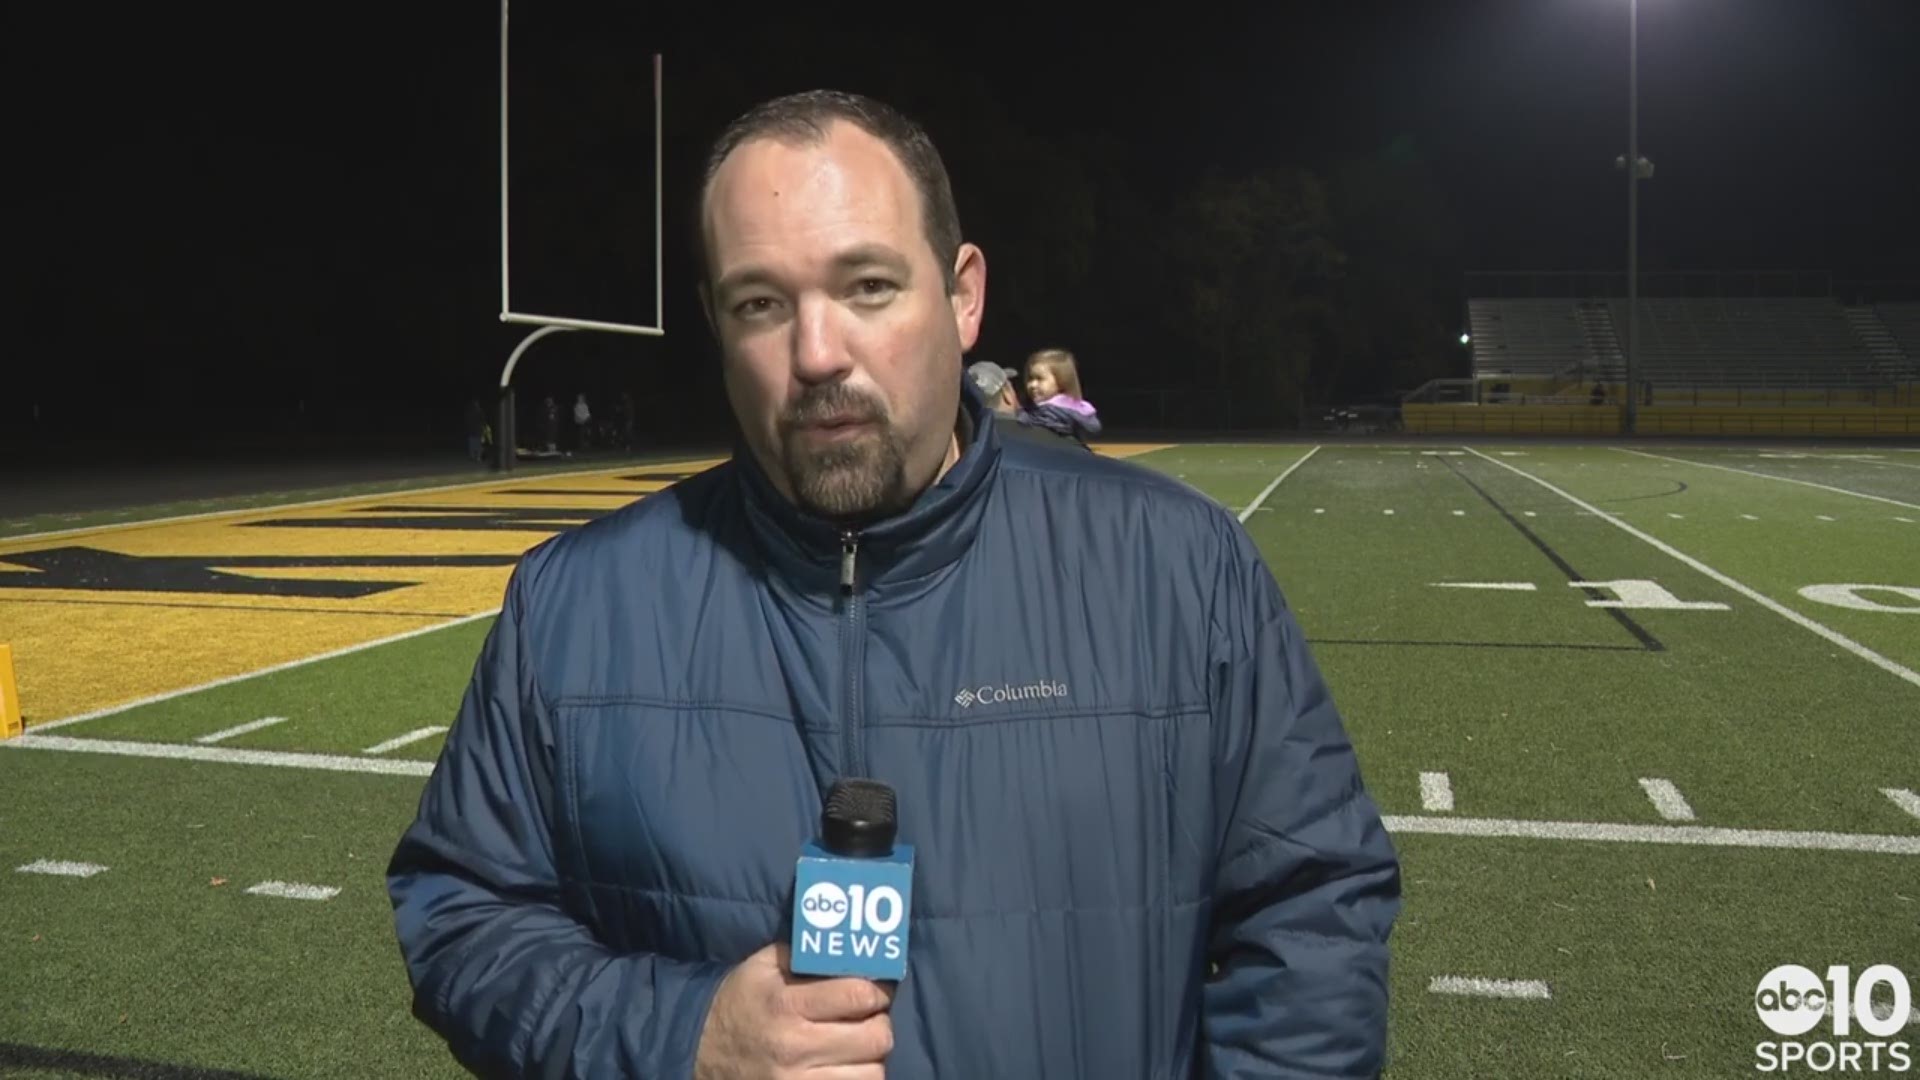 Our ABC10 Fan Game of the Week takes us out to Rio Linda, home of the defending state champion Knights, who were upset by the Sierra Timberwolves in the semifinals o